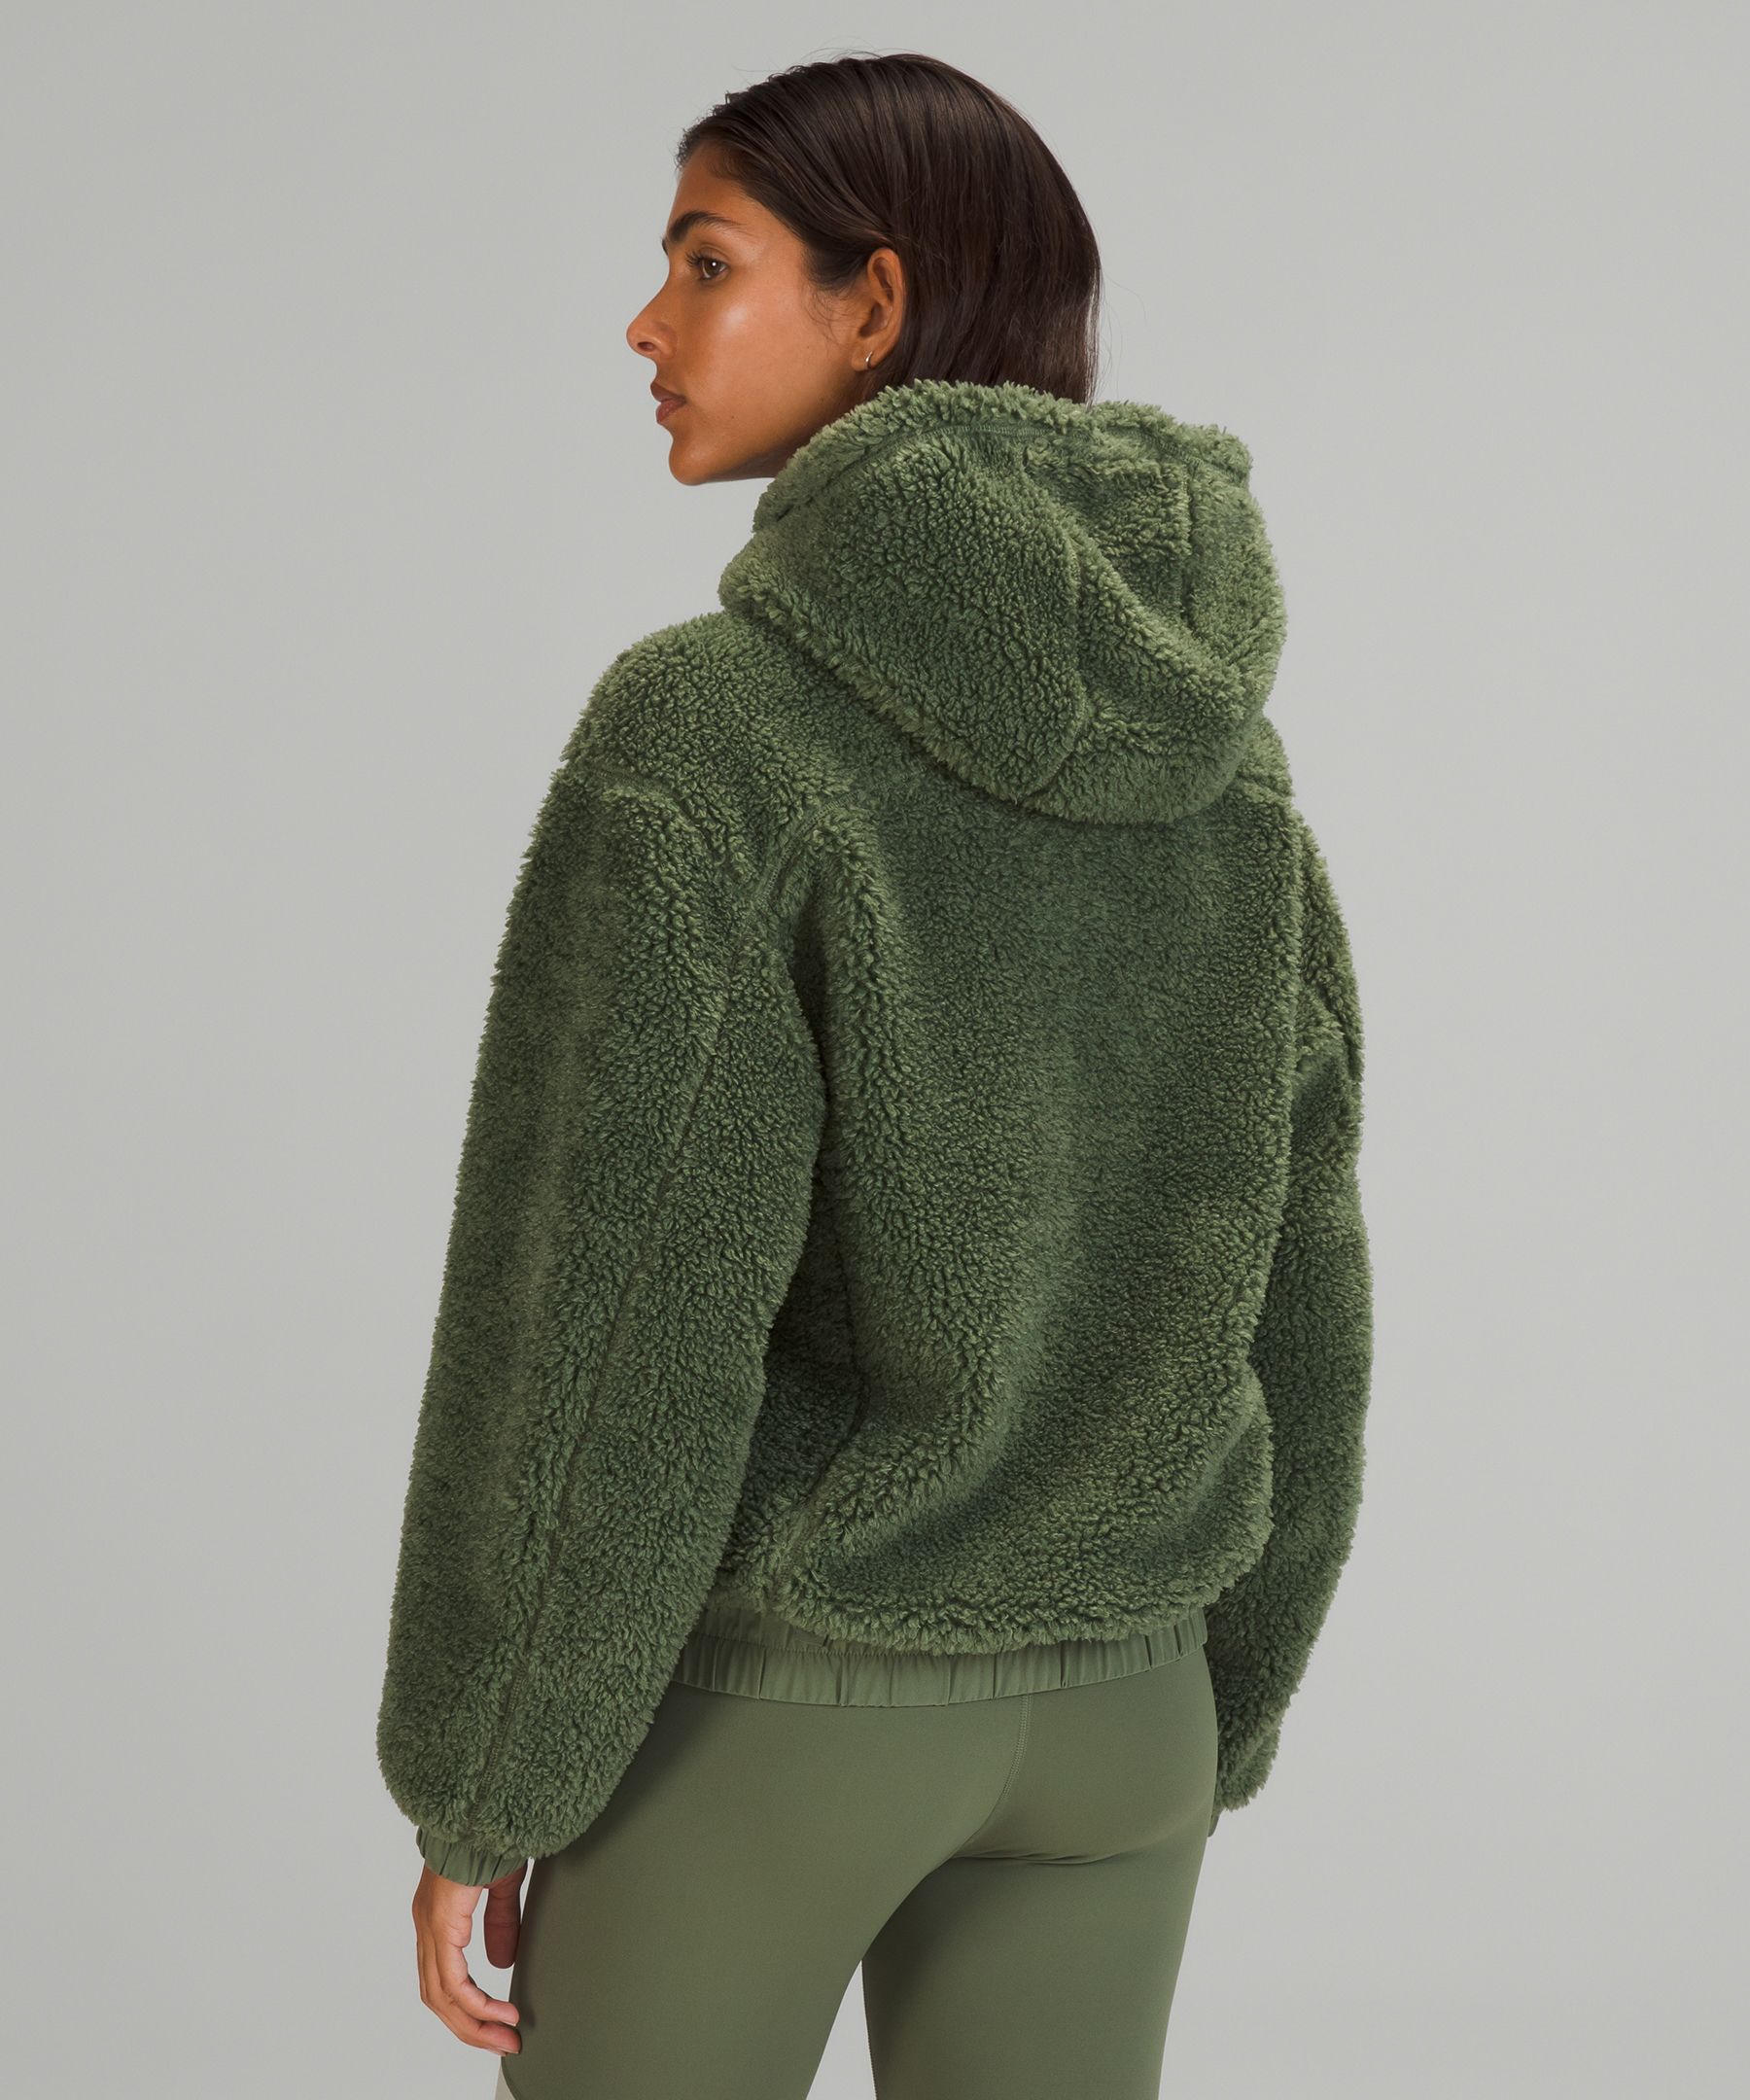 New Plush Fleece Collection Released in China : r/lululemon